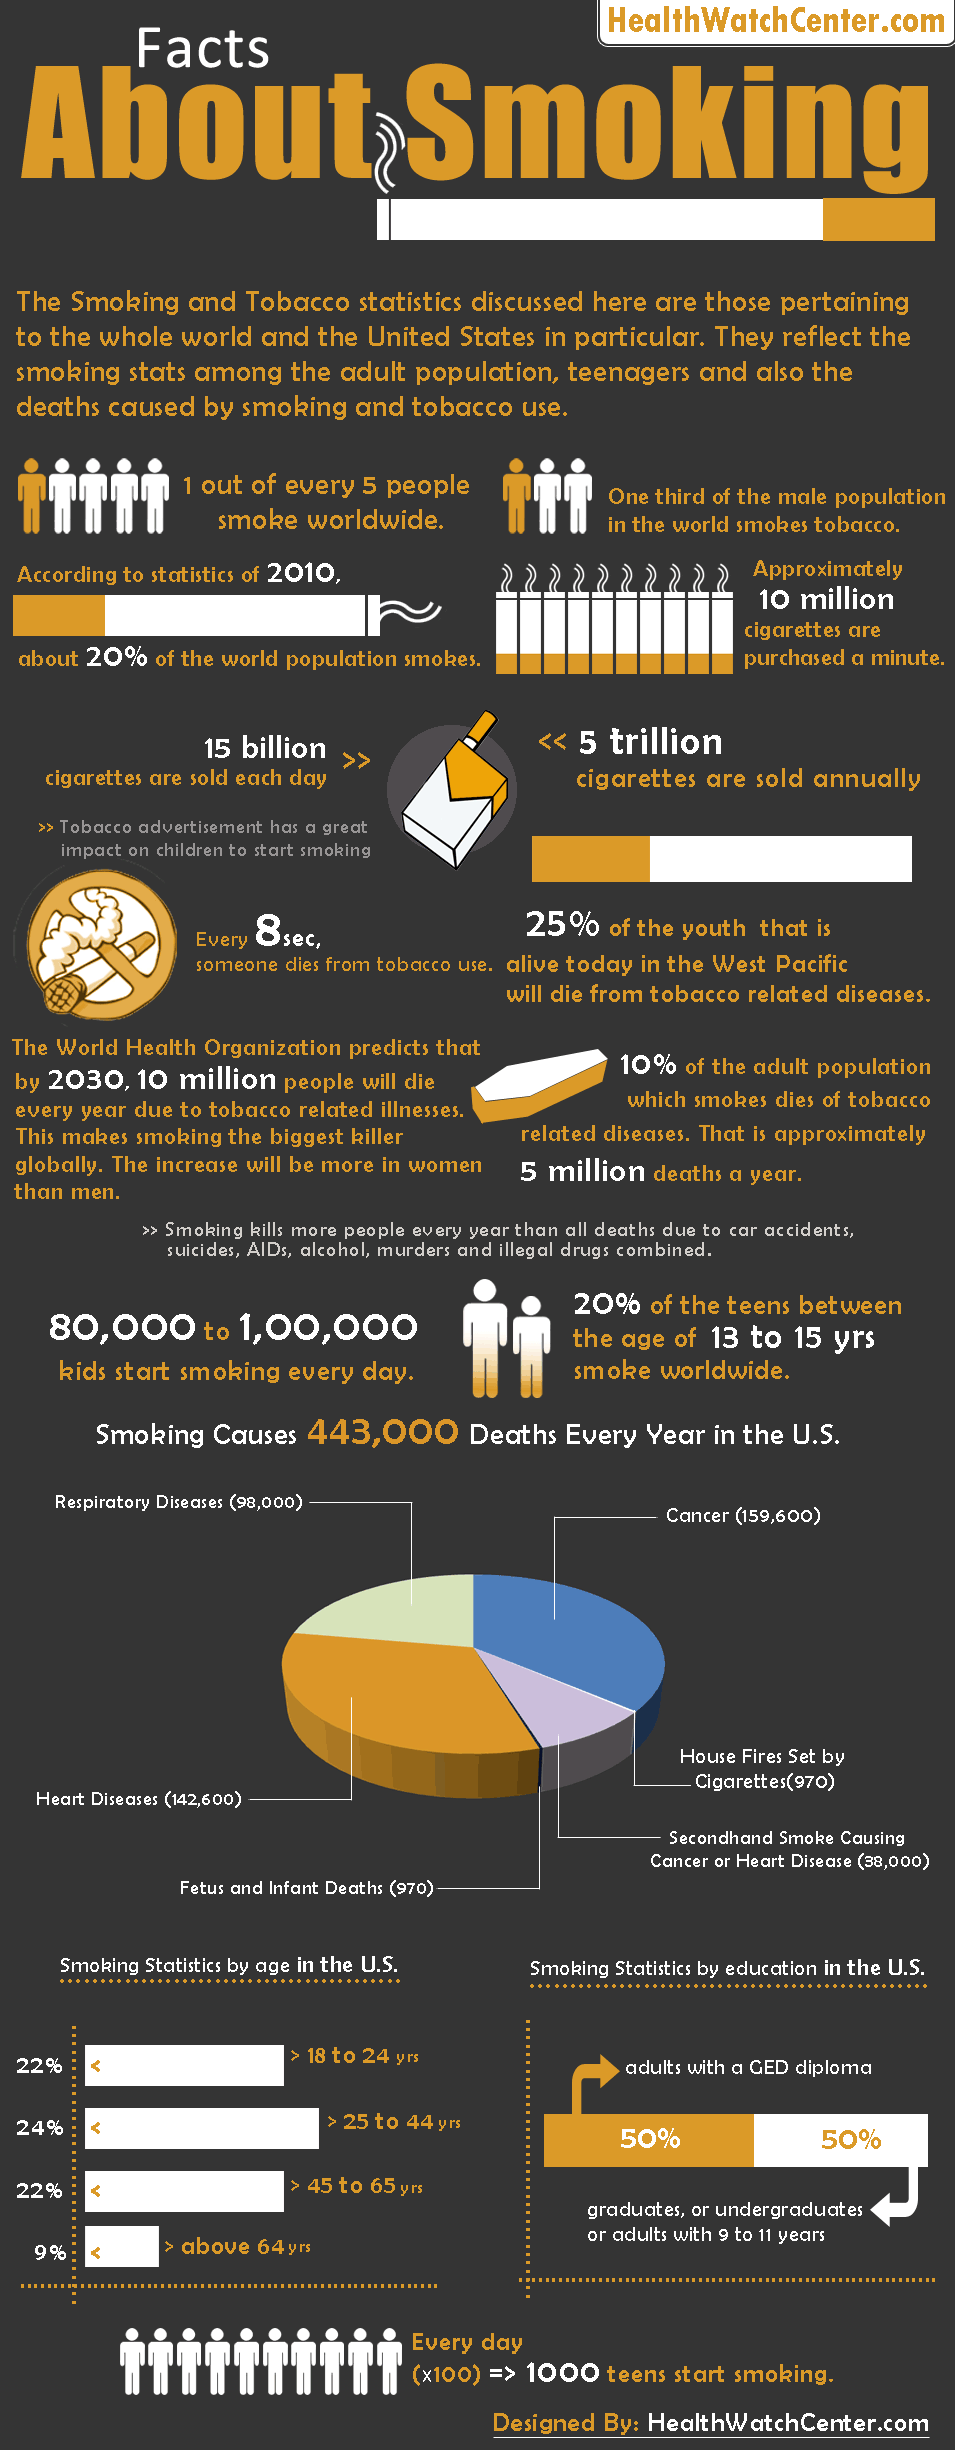 facts-about-smoking-infographic